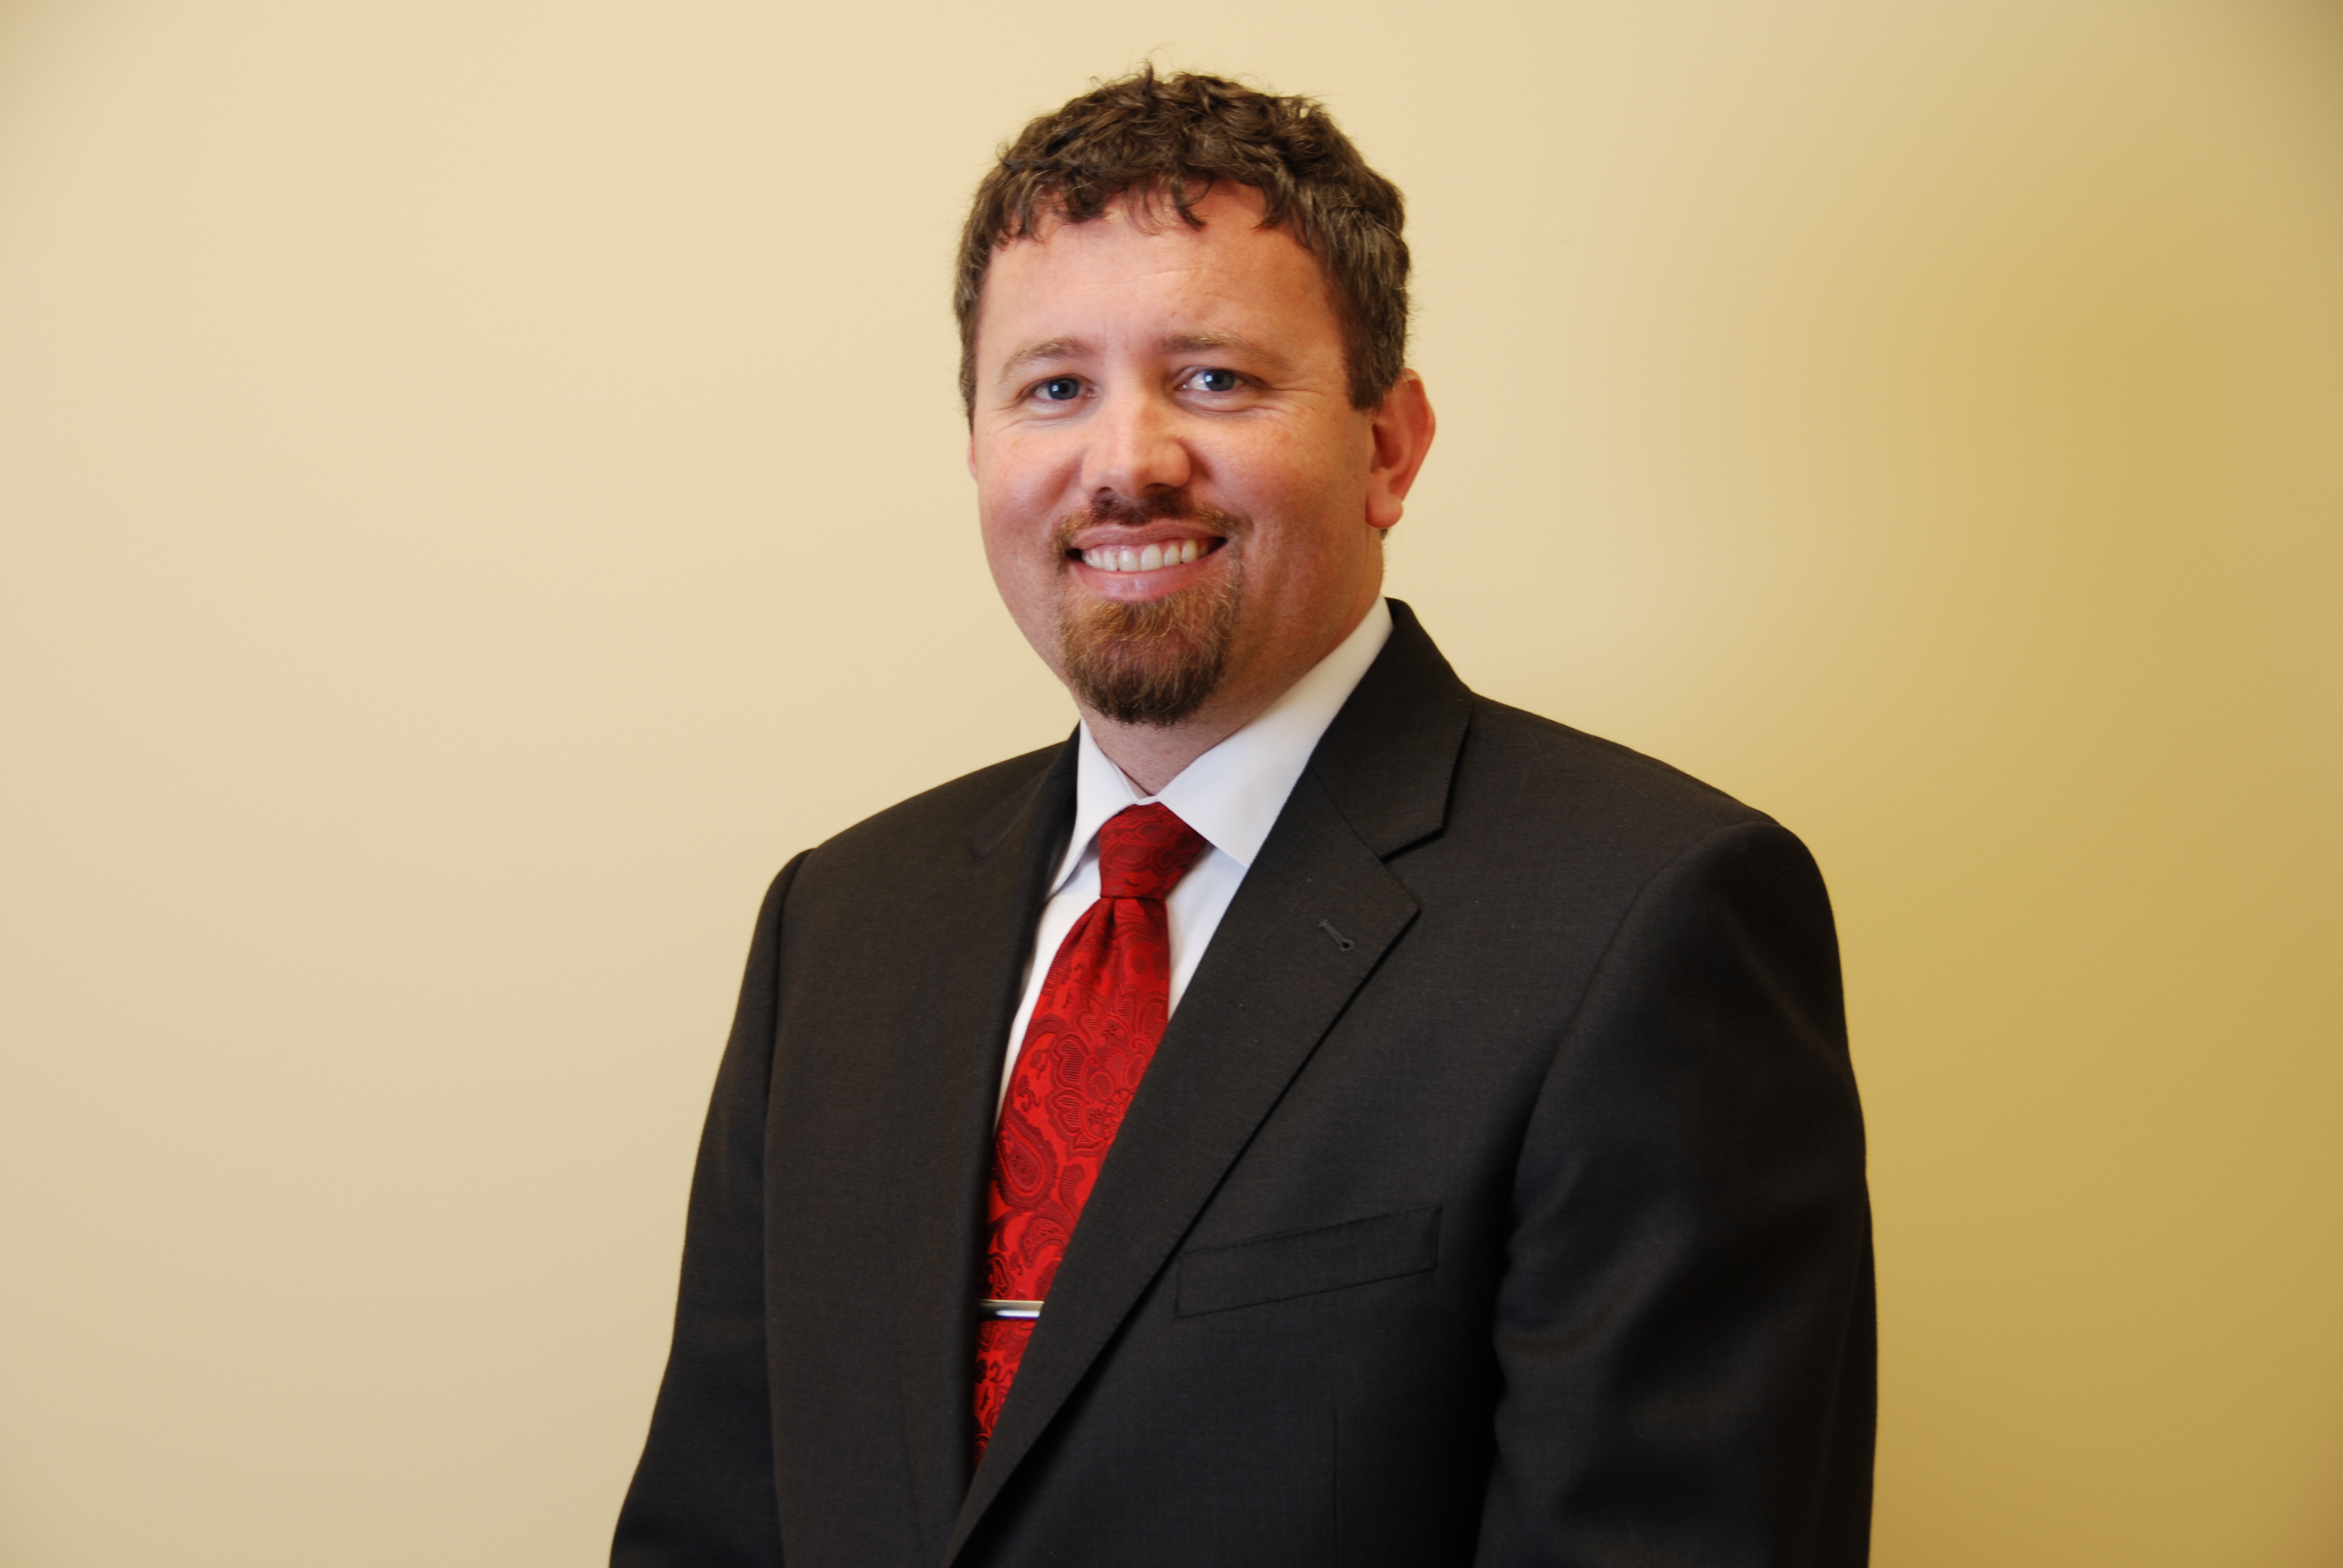 Kyle Standridge is Co-Owner and Operator of Lakeside Funeral Home in Woodstock, GA. He is dedicated to providing care and compassion to families in Cherokee, North Fulton and North Cobb Counties.